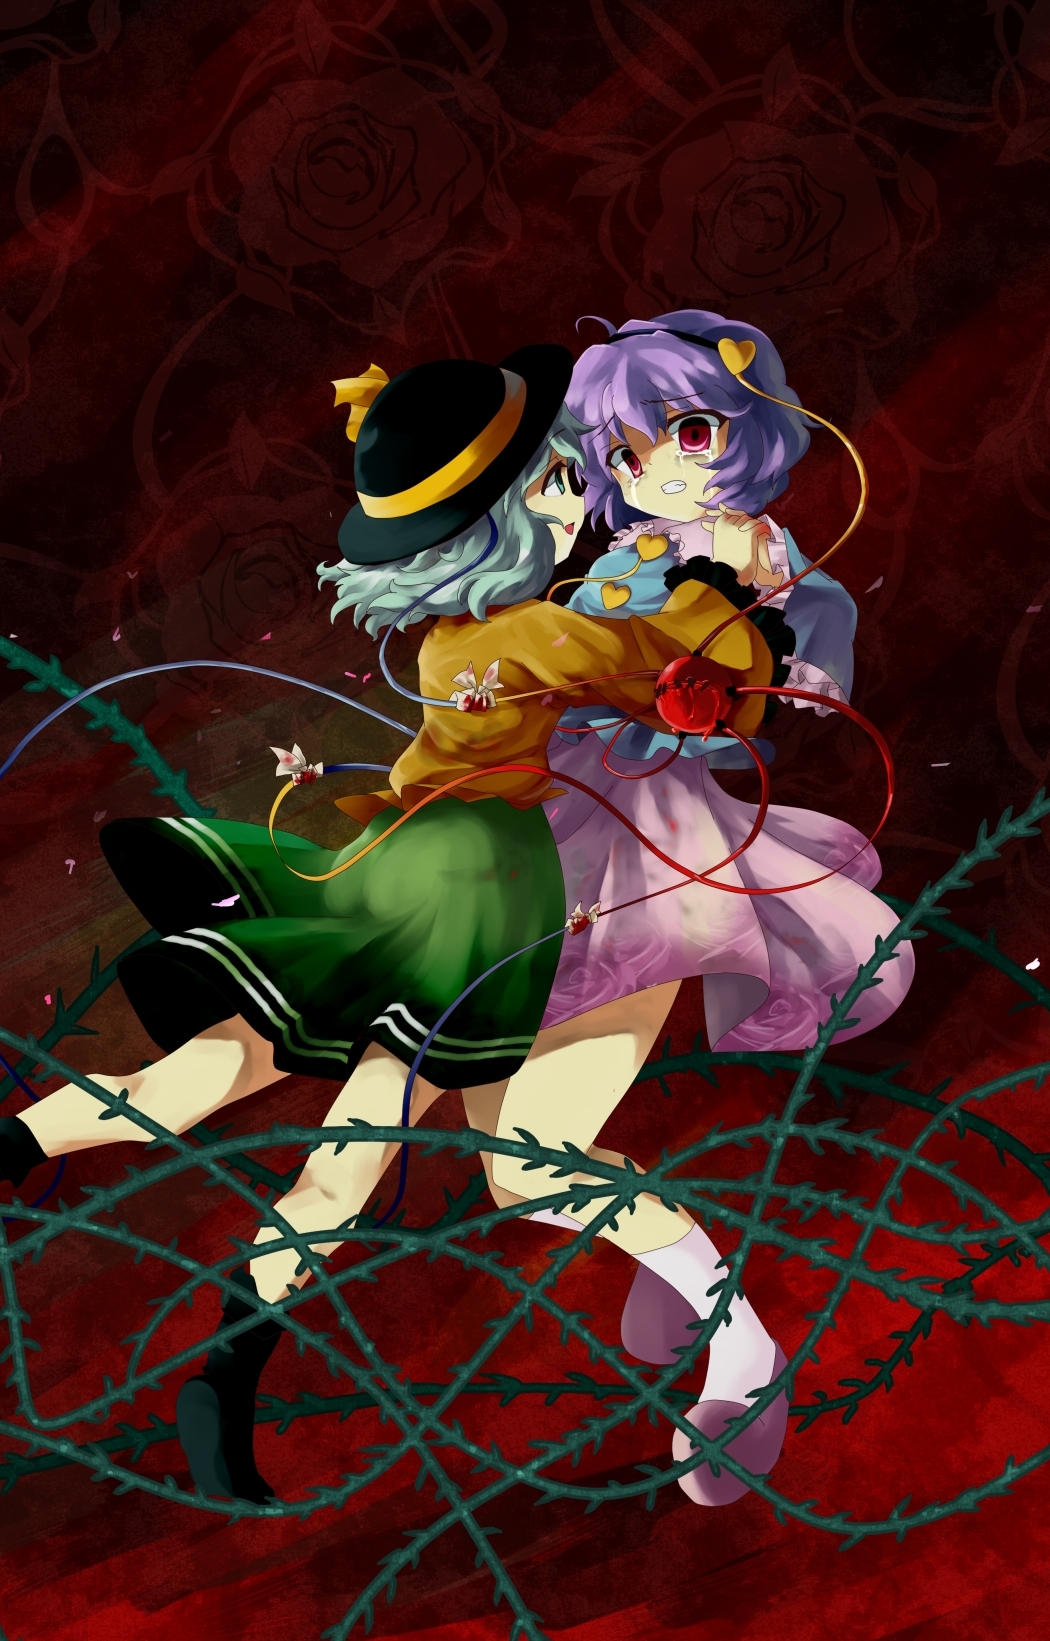 2girls asyura7 blood boots bow clenched_teeth empty_eyes eyes flower green_eyes hairband hat heart holding_hands komeiji_koishi komeiji_satori open_mouth purple_hair red_eyes ruffles short_hair siblings silver_hair sisters skirt smile stitches tears thorns touhou vines yandere